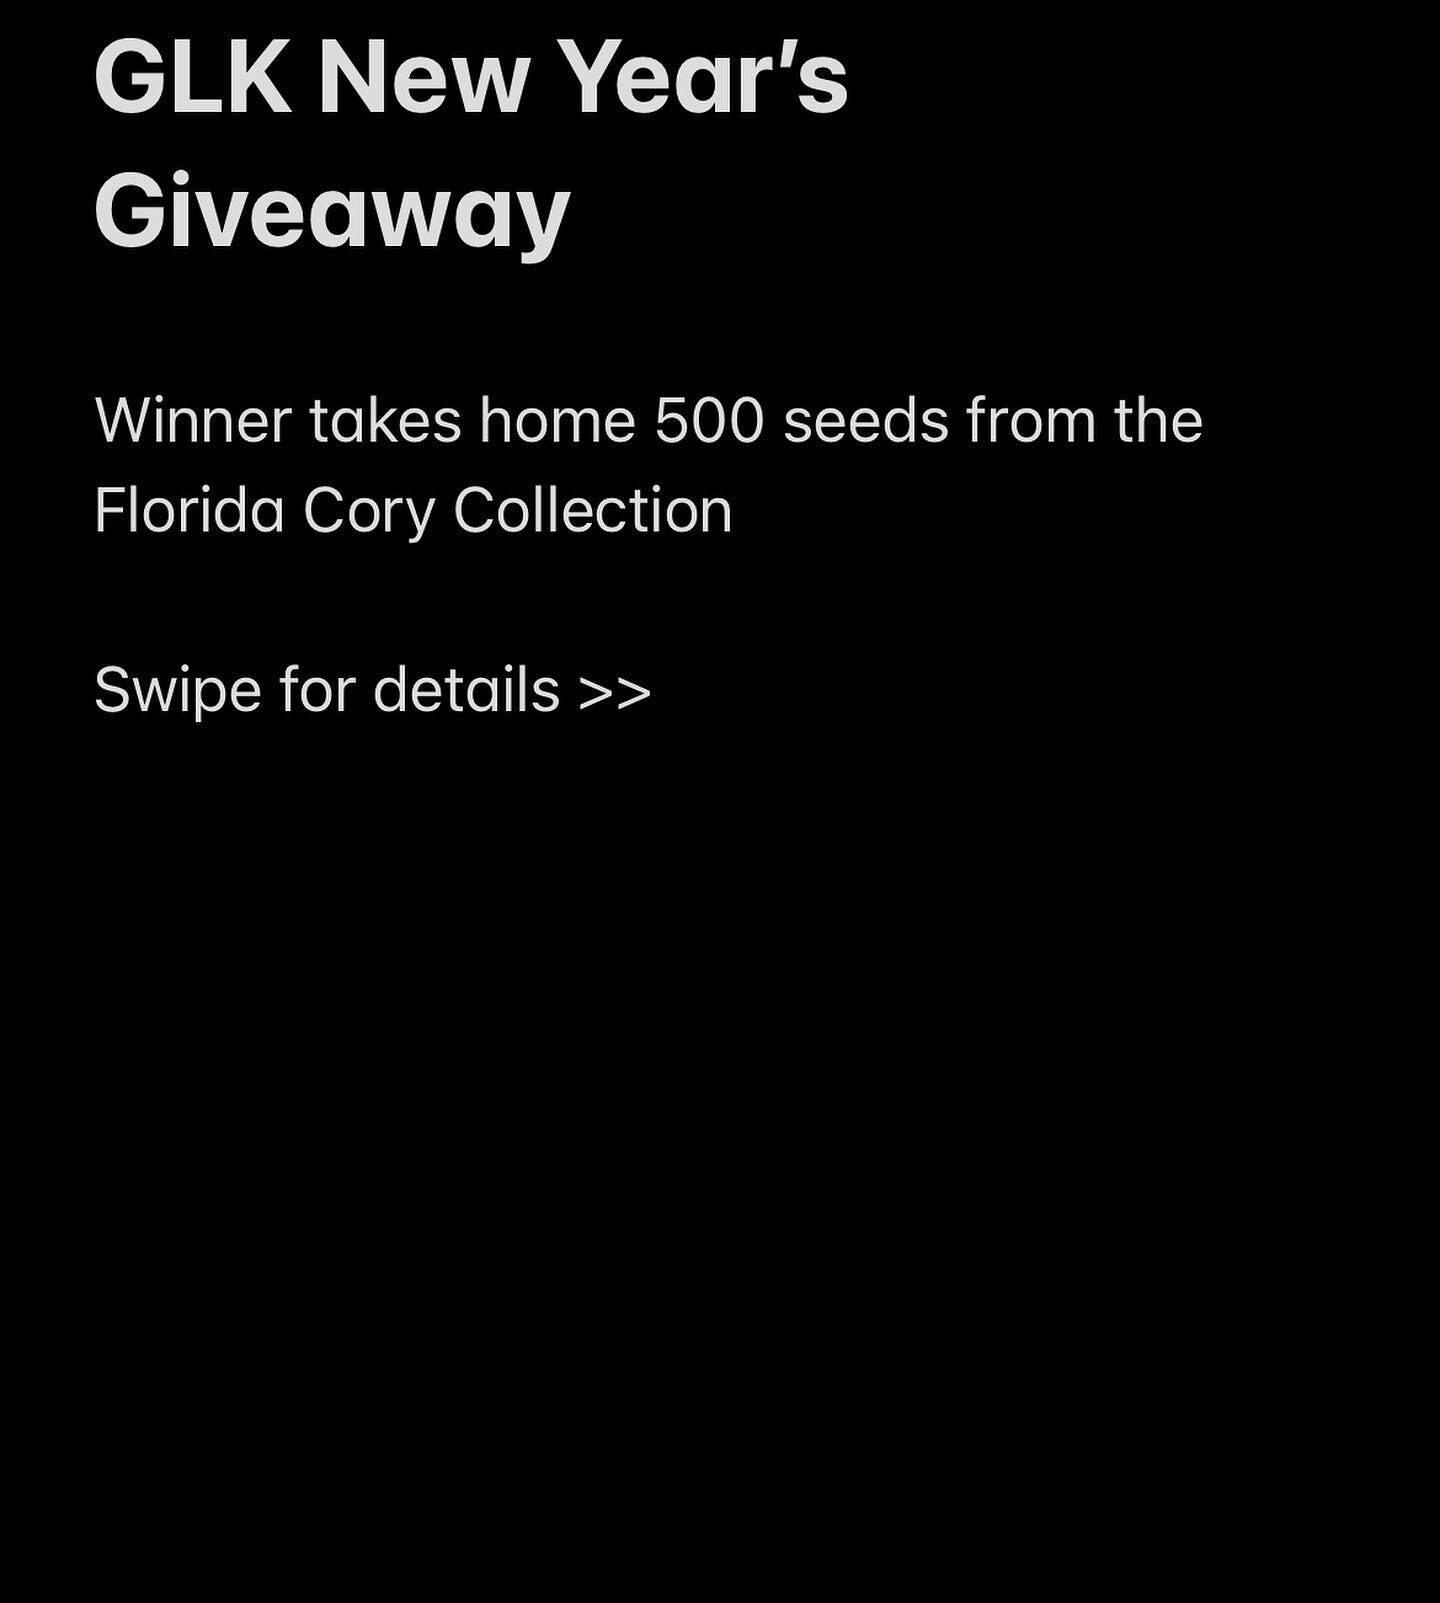 GLK new years giveaway!! This is a big one with 500 seeds going out valued at over $4000. Winner gets to select from the Florida Cory seed collection of 2022. Sponsored by @coryczapiga @great_lakes_kush 

#glkgenetics #greatlakeskush #giveaway #freeb